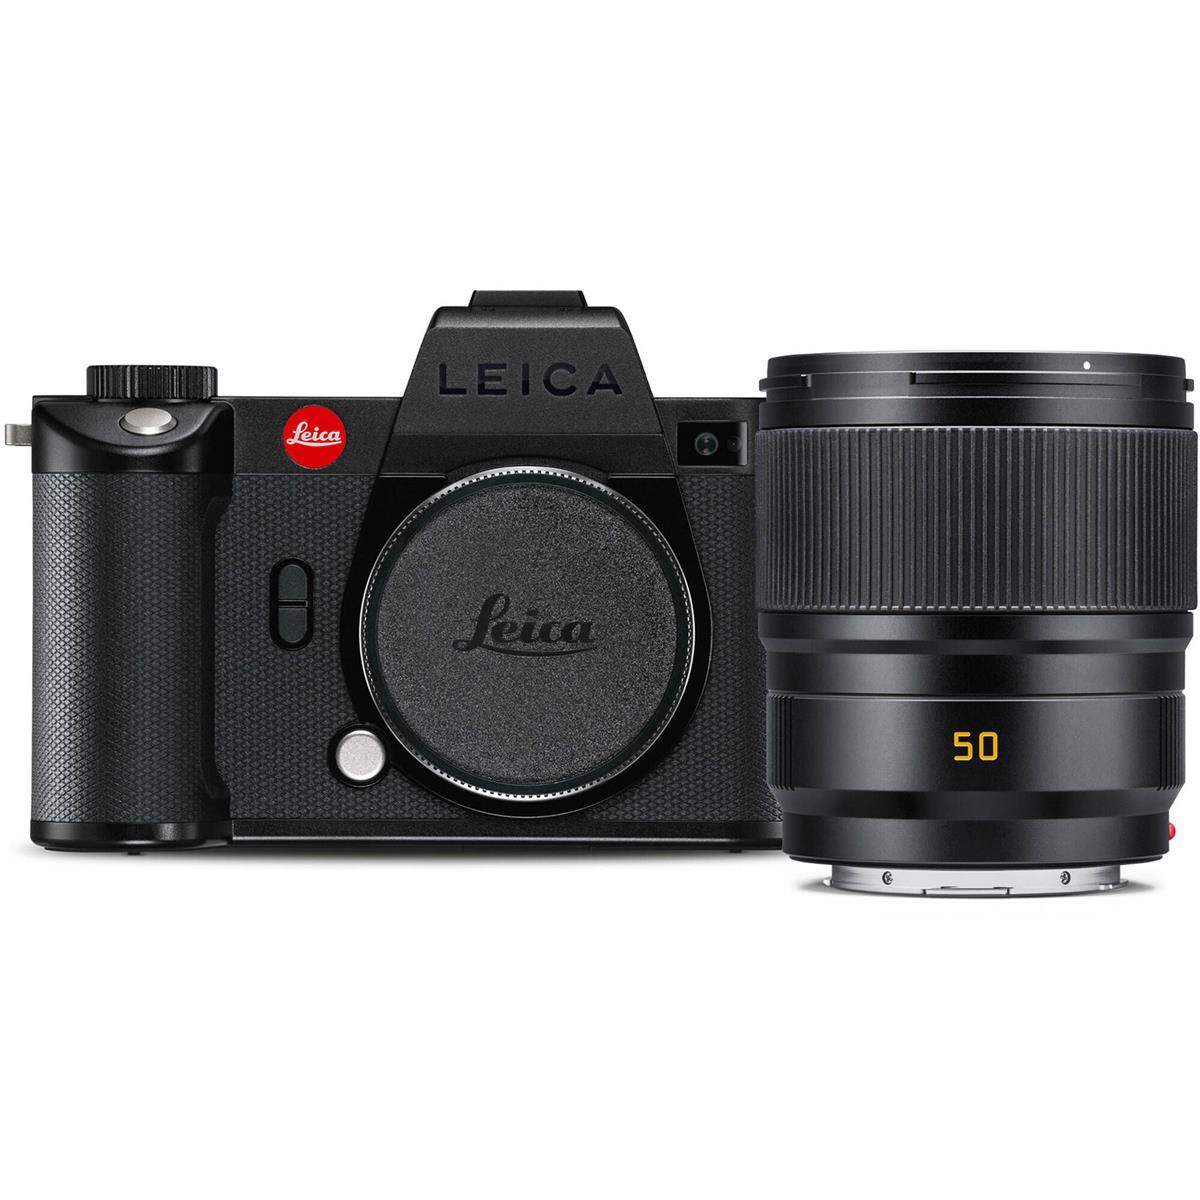 Image of Leica SL2-S Mirrorless Camera with Summicron-SL 50mm f/2 ASPH Lens